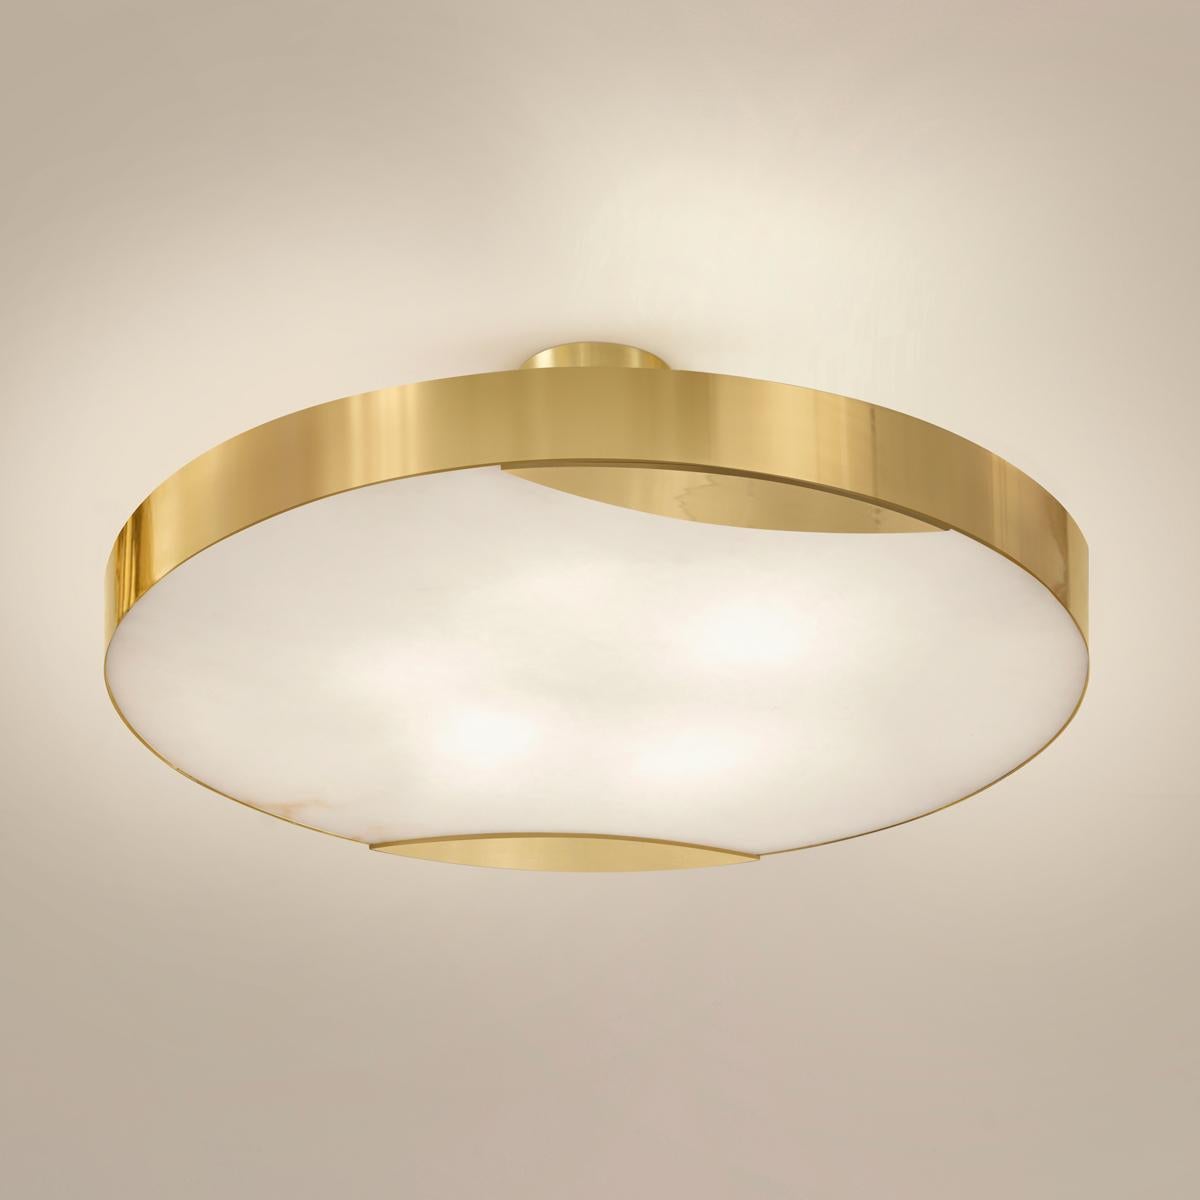 Contemporary Cloud N.1 Ceiling Light by Gaspare Asaro-Bronze Finish For Sale